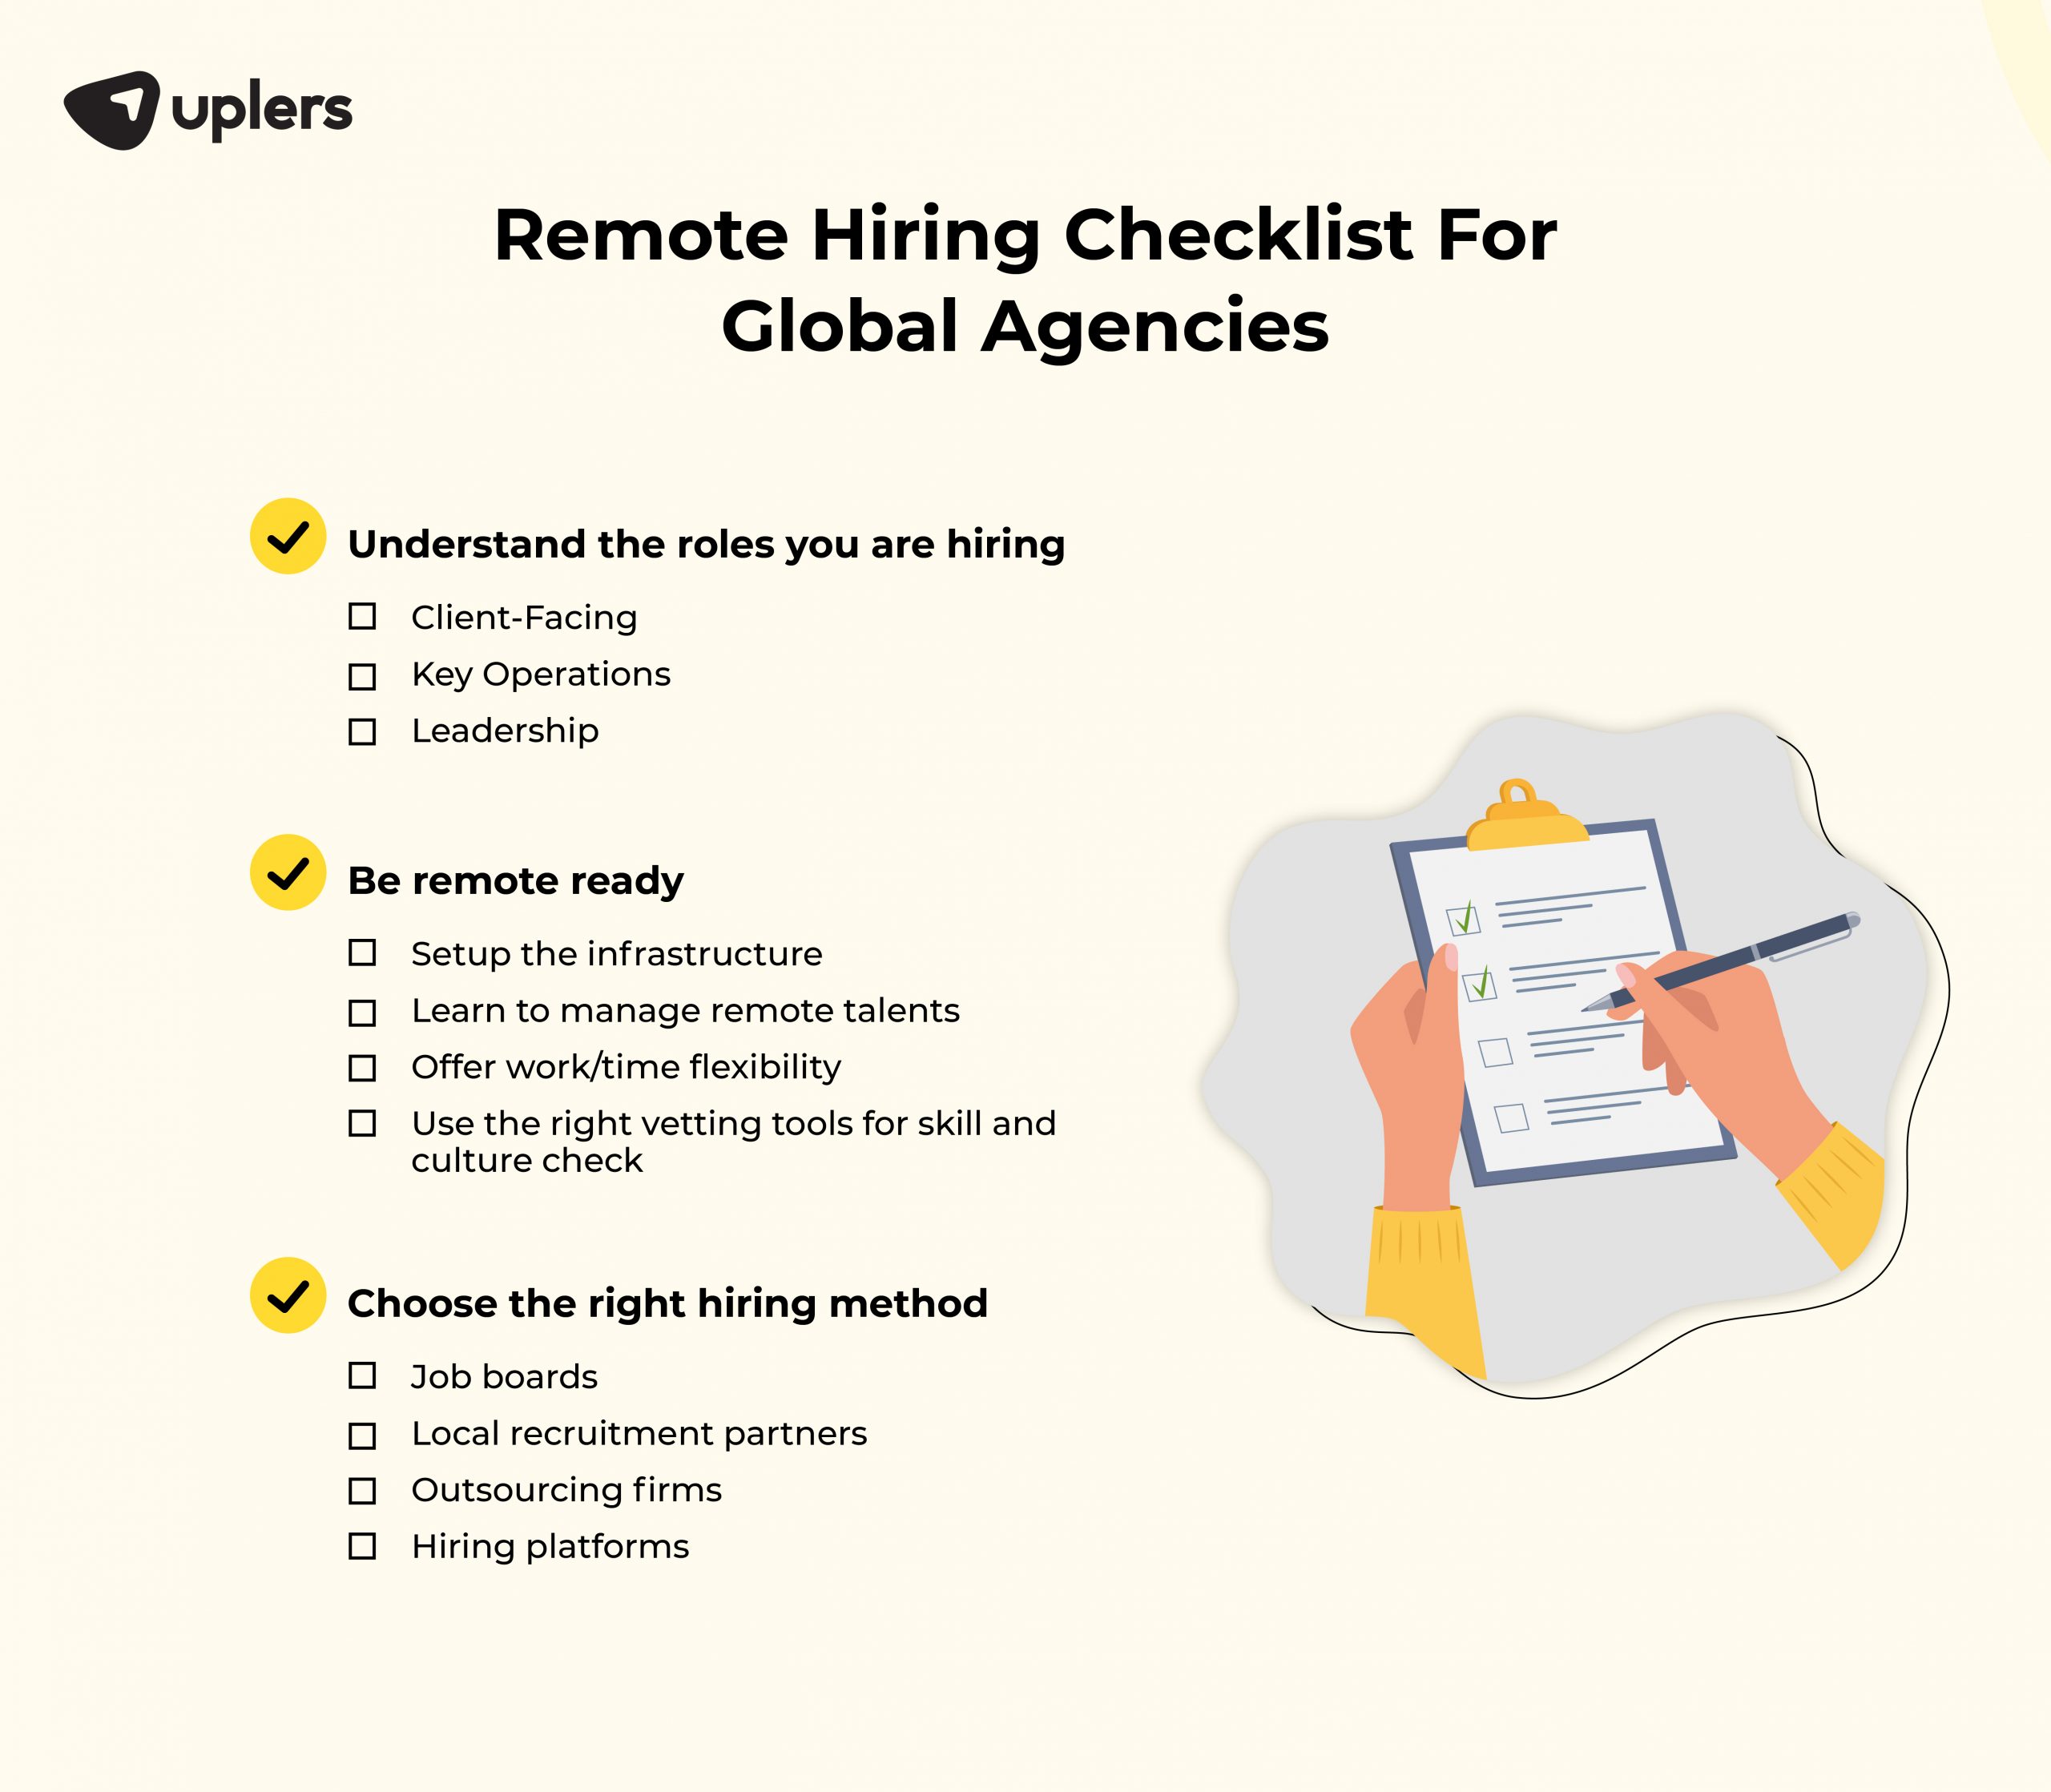 global agile agencies have hired remote talents from offshore locations